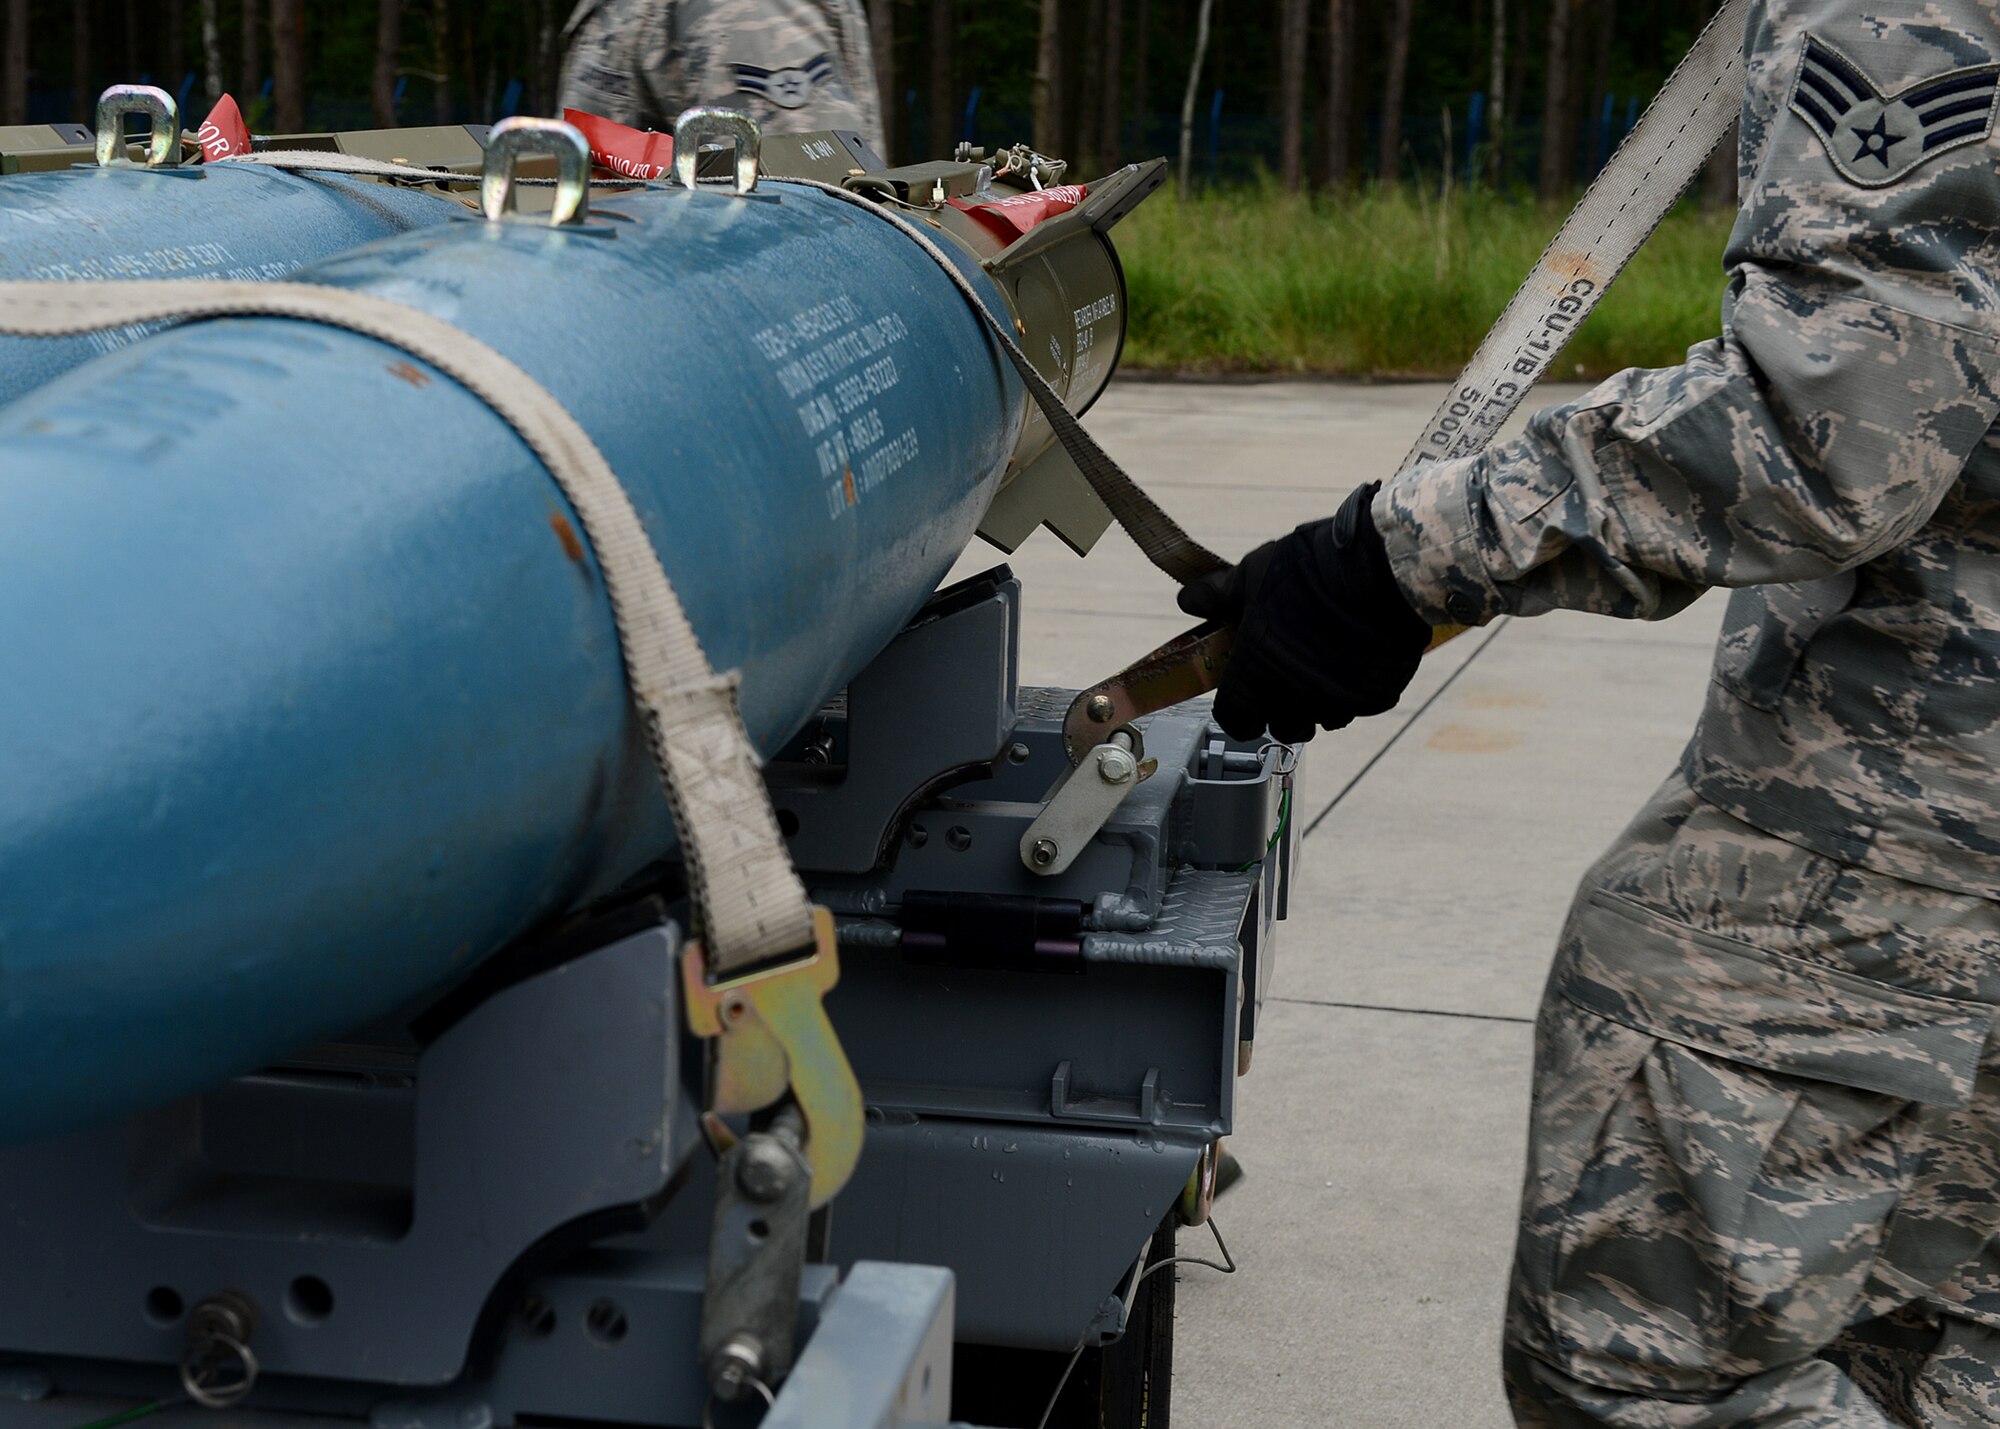 U.S. Air Force Senior Airman Timothy Greening, 52nd Equipment Maintenance Squadron precision guided munitions crew member from Norman, Okla., secures multiple Bomb Drop Unit-50 onto a transport trailer at Lask Air Base, Poland, June 12, 2014. The 52nd EMS from Spangdahlem Air Base, Germany, supported the U.S. Aviation Detachment Rotation 14-3 and participated in exercises EAGLE TALON and BALTOPS 14 by providing training ammunition for pilots. The multinational exercises aimed to increase interoperability with foreign nations and strengthen NATO partnerships. (U.S. Air Force photo by Airman 1st Class Kyle Gese/Released)